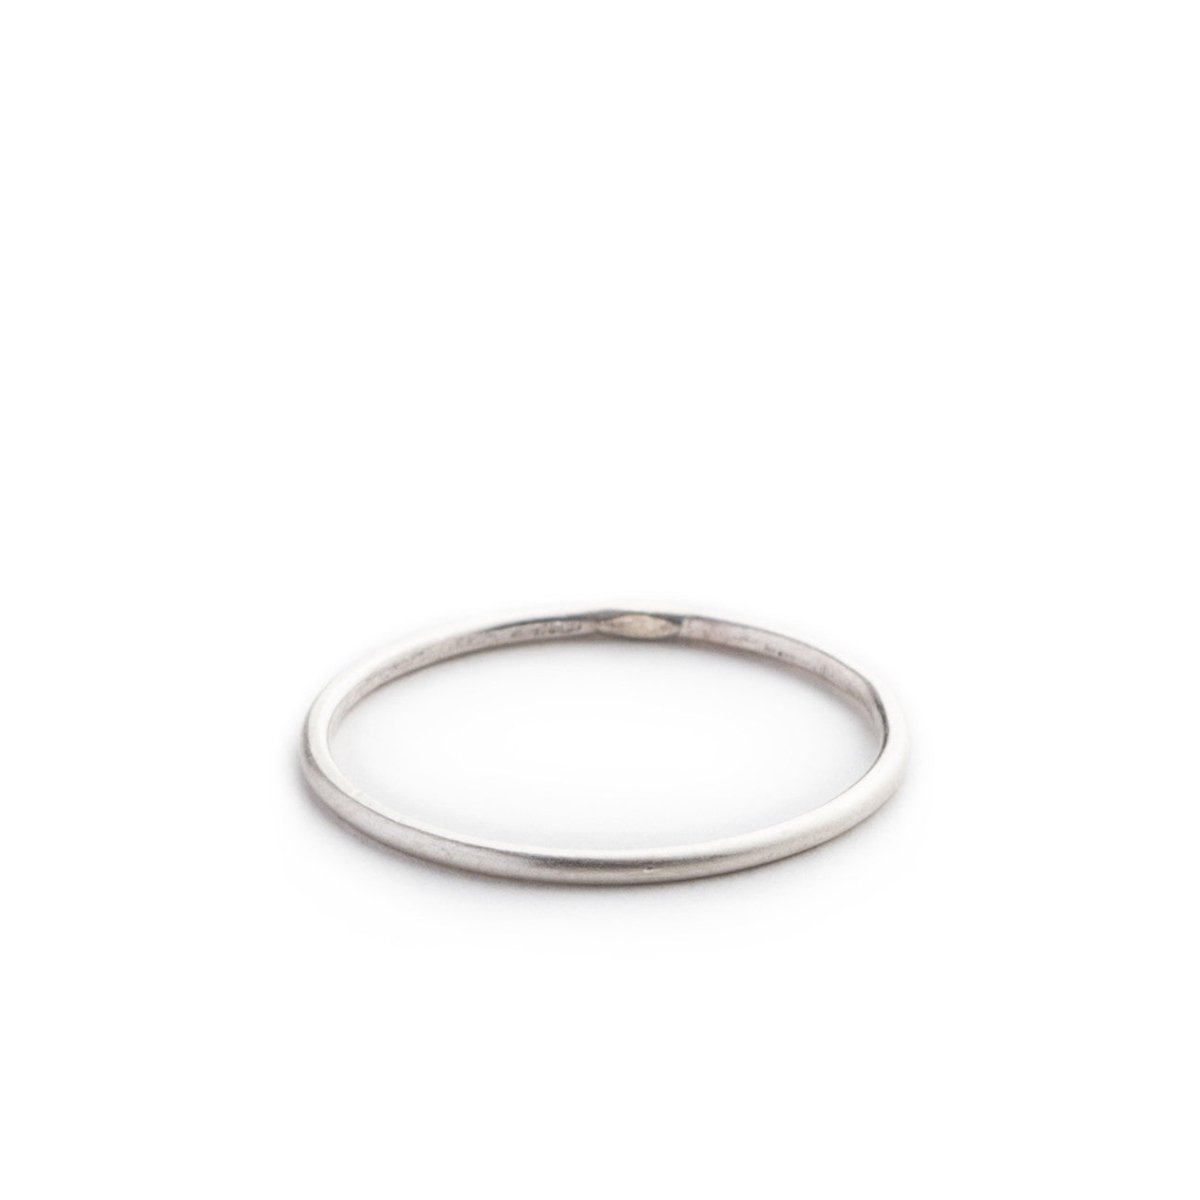 Faceted Sterling Silver ring by B & Iya